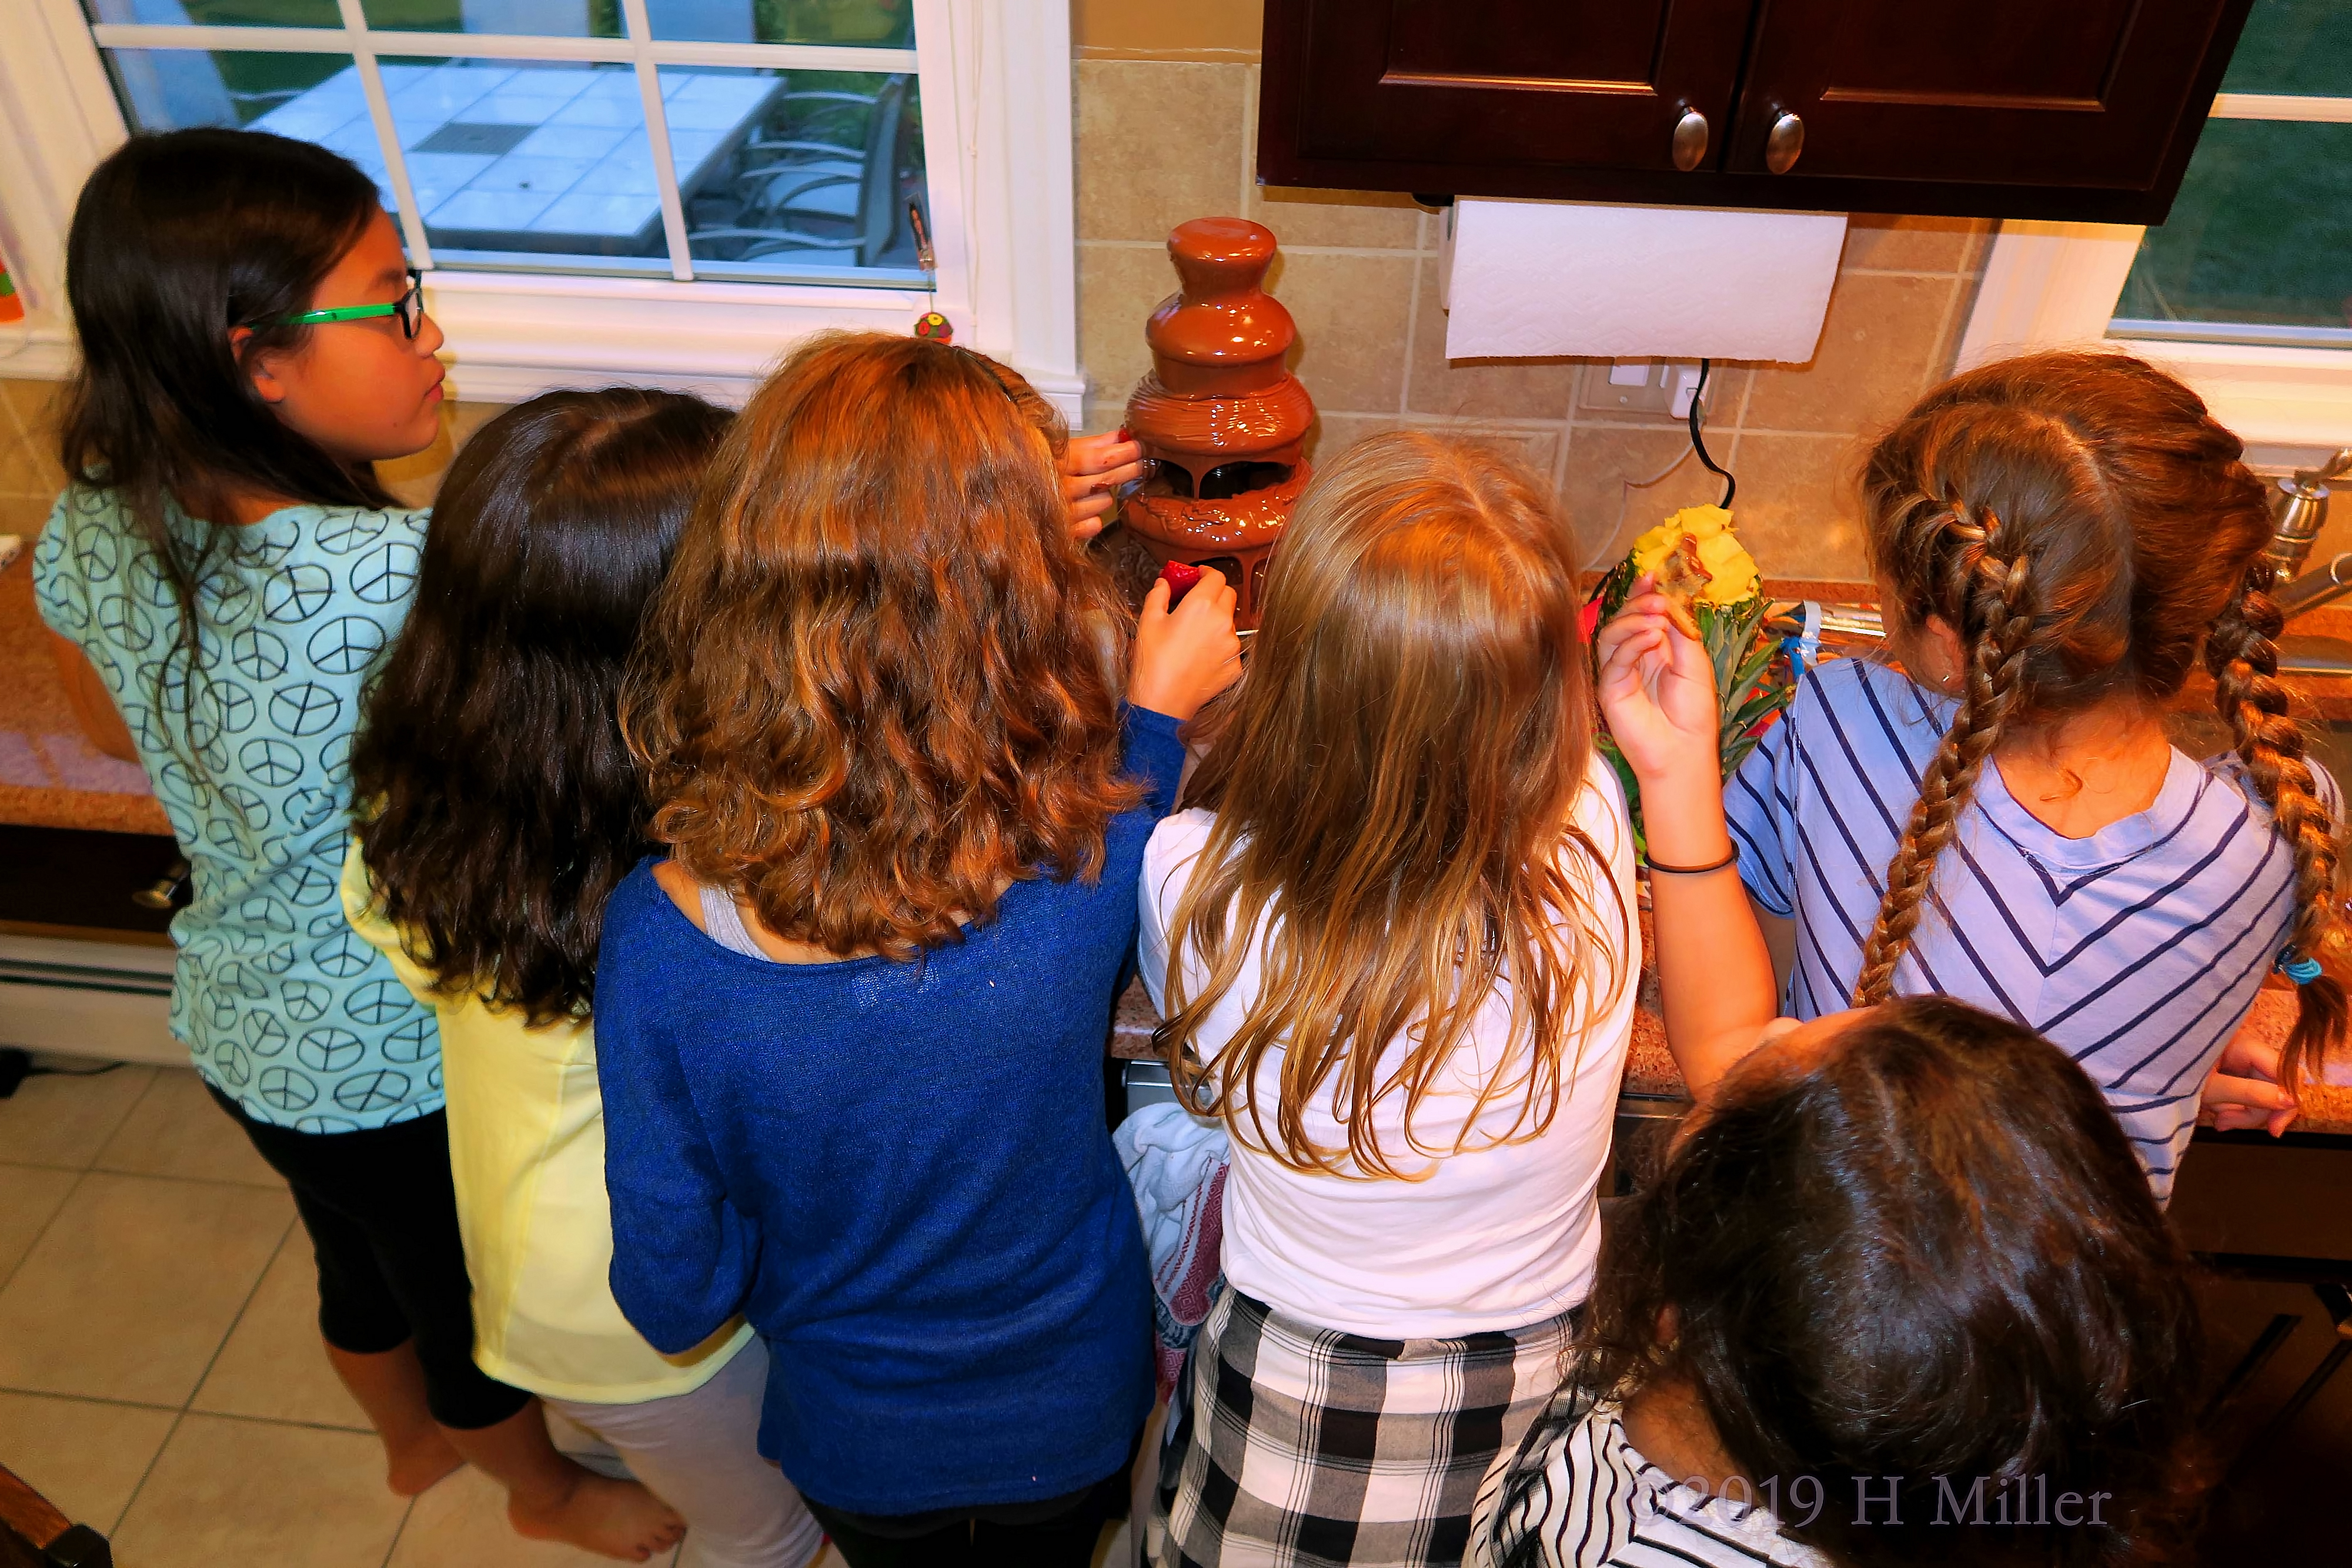 The Girls Dipping Their Fruit And Cookies Into The Chocolate Fountain 